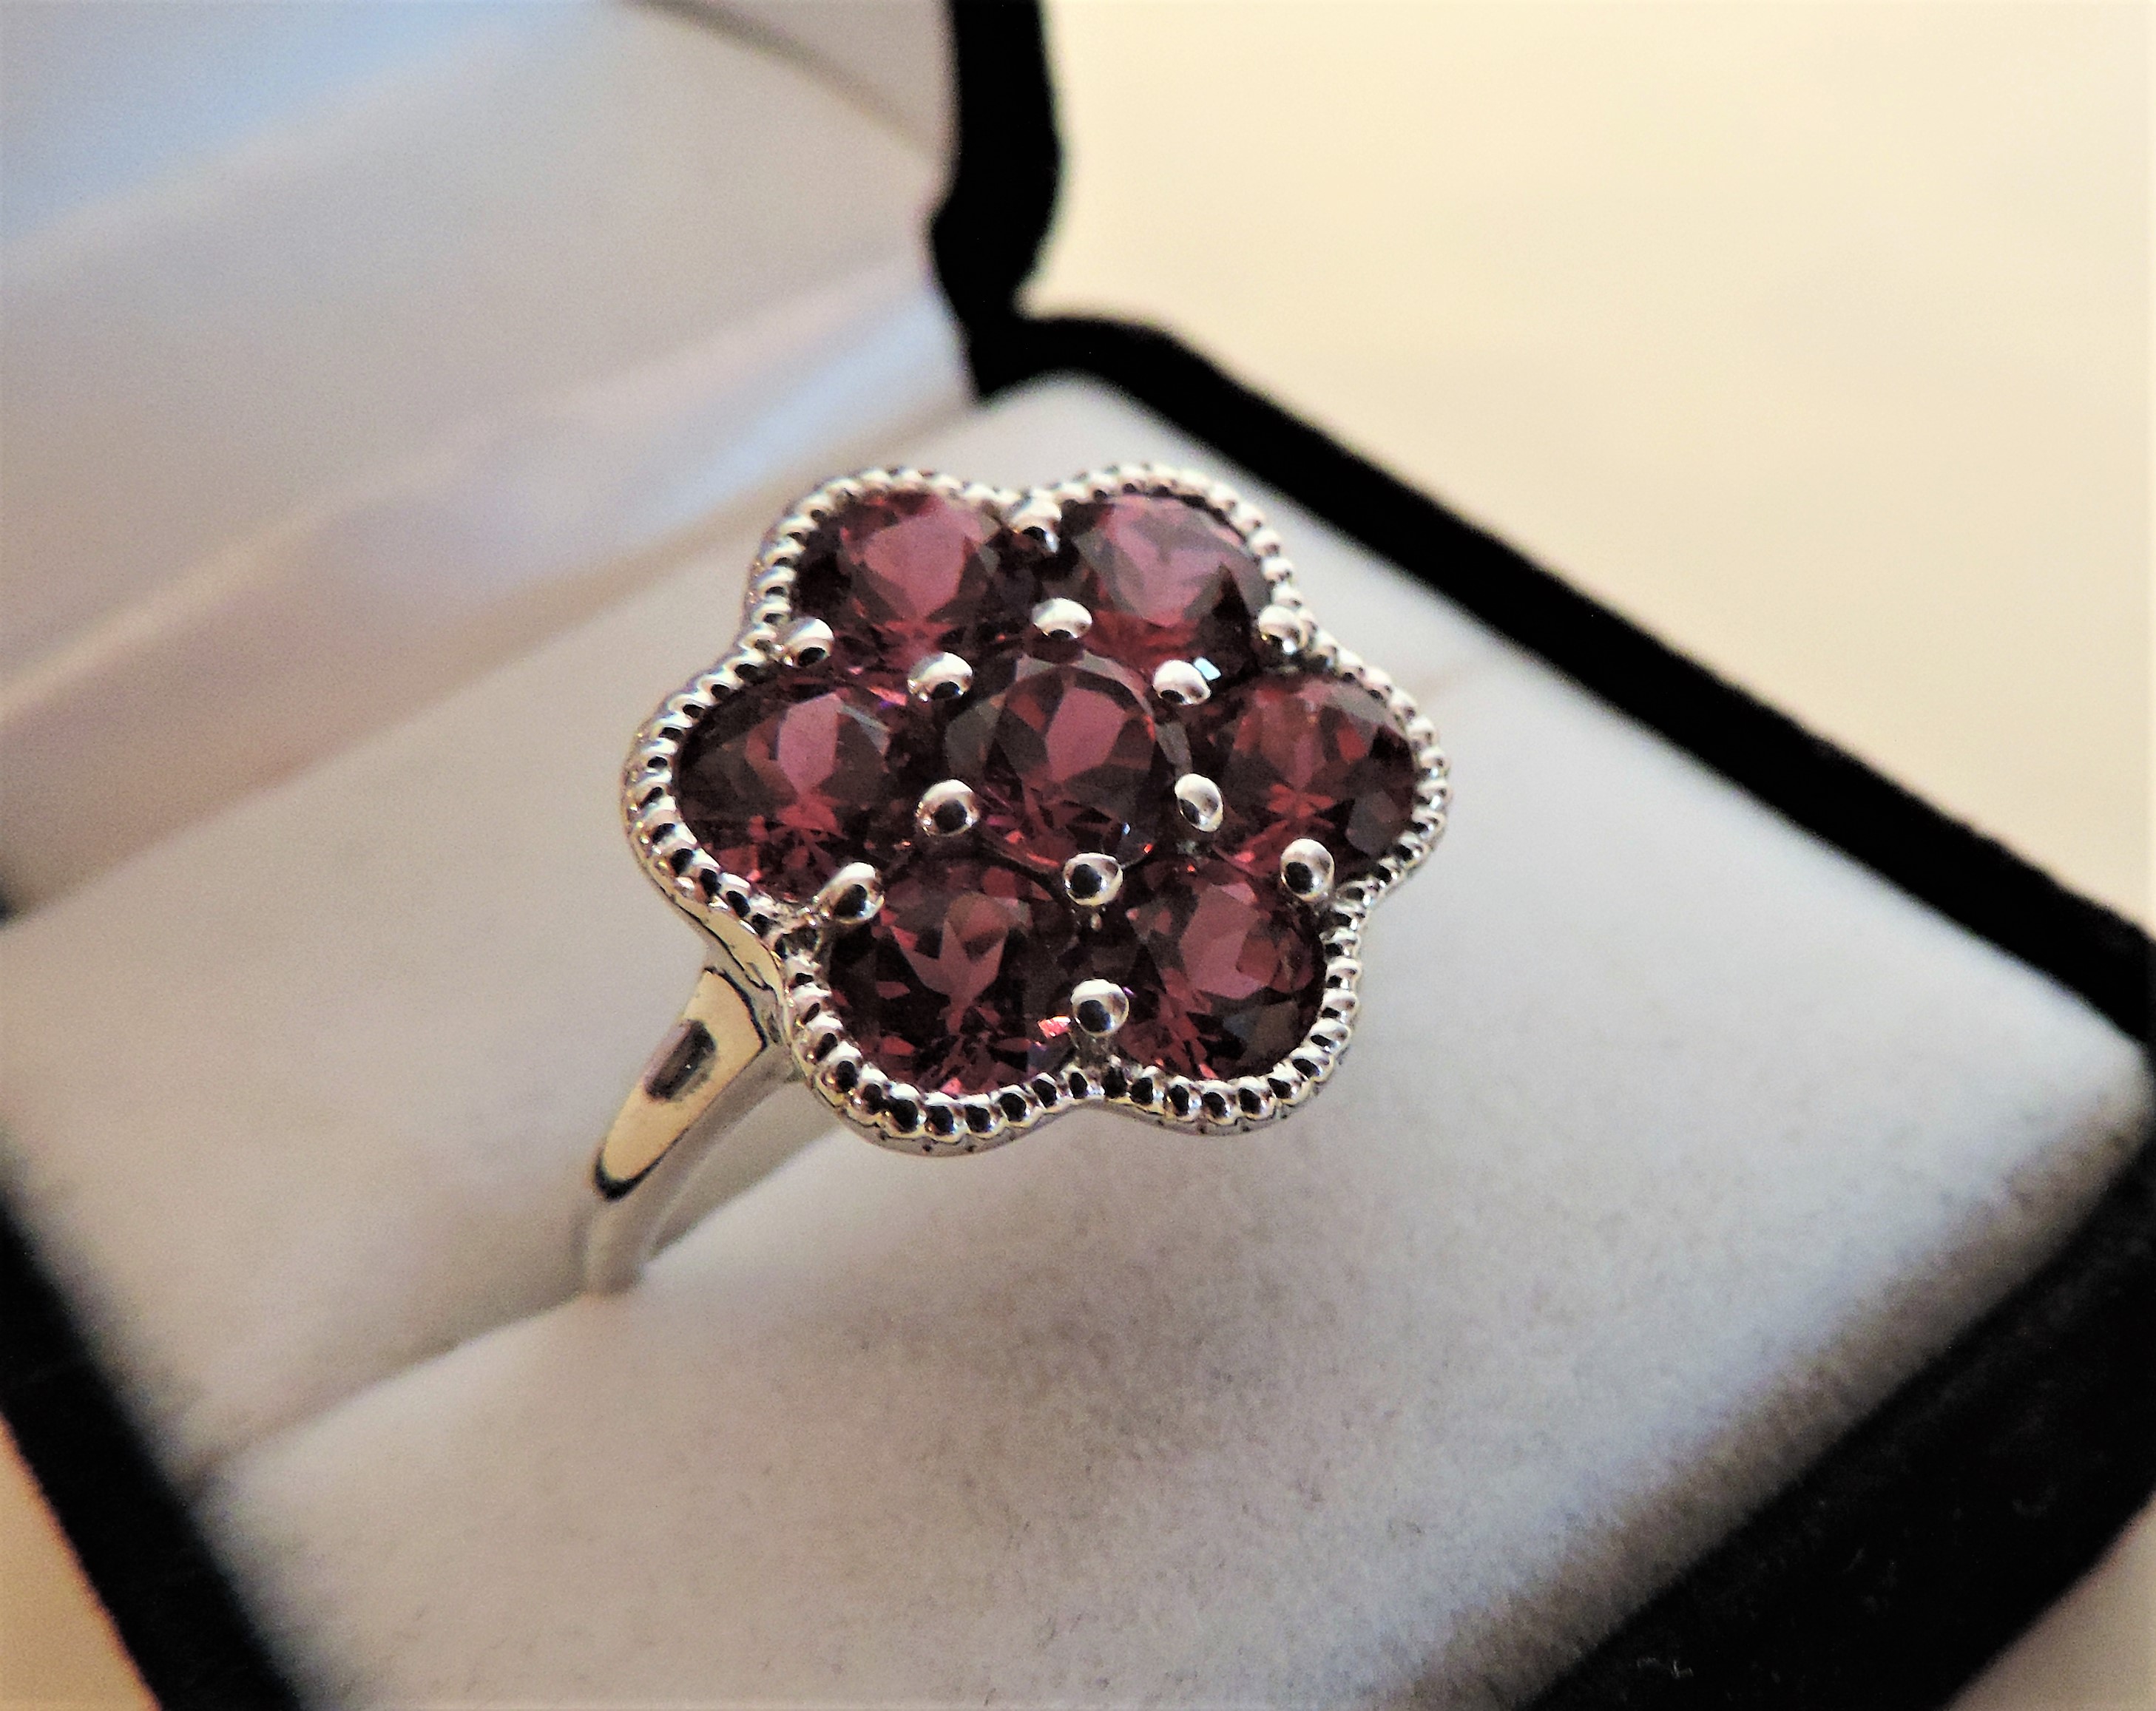 4.55 Carat Pink Sapphire Cluster Ring in Sterling Silver